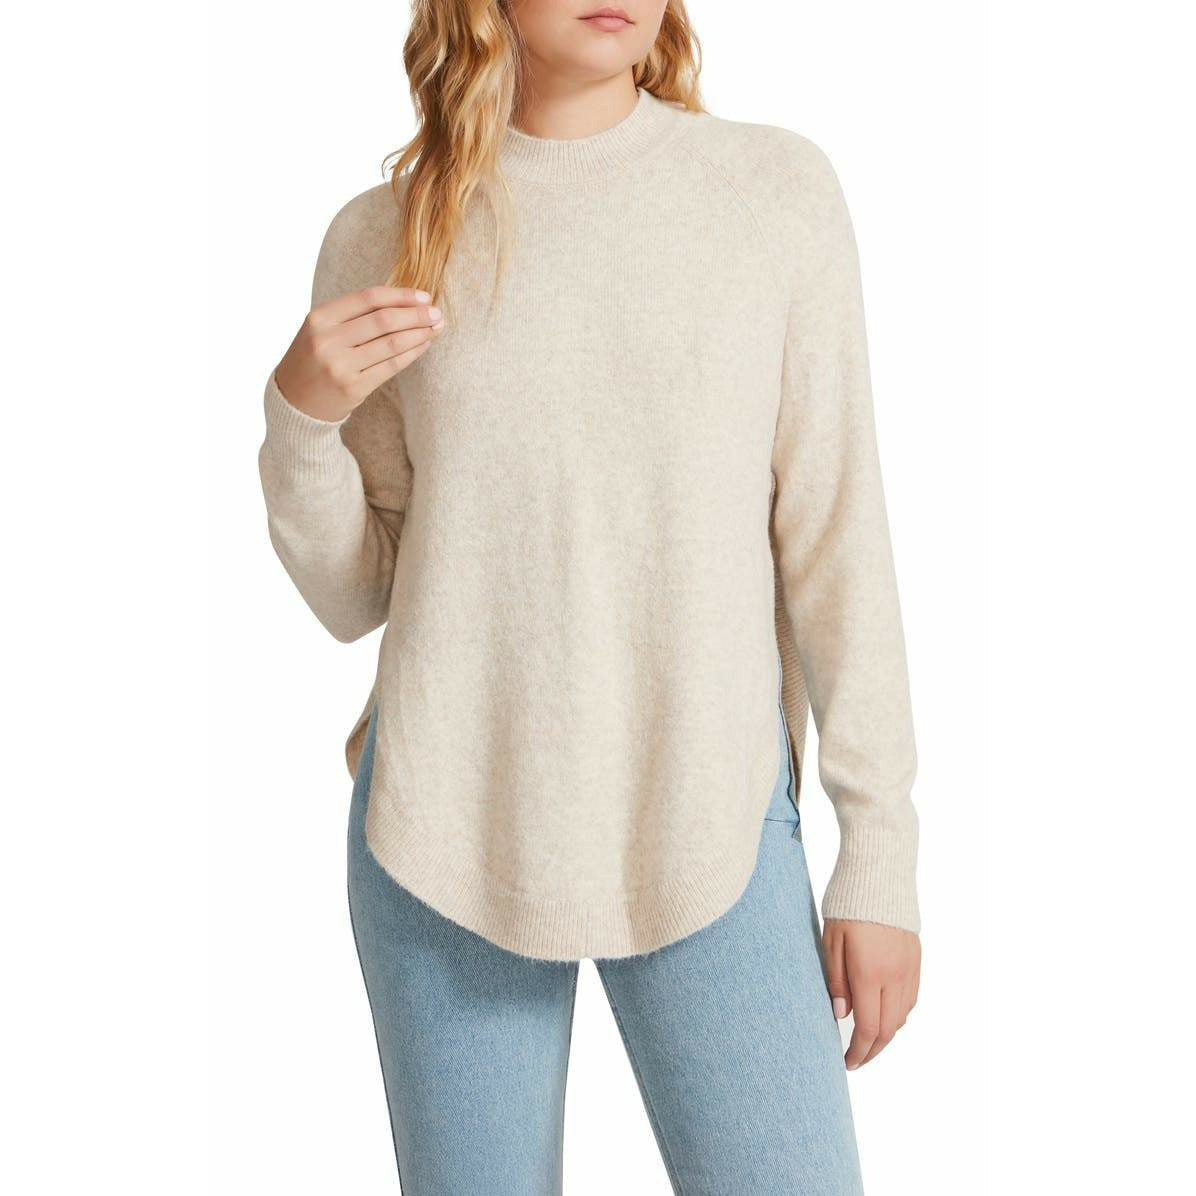 Learning Curve Sweater